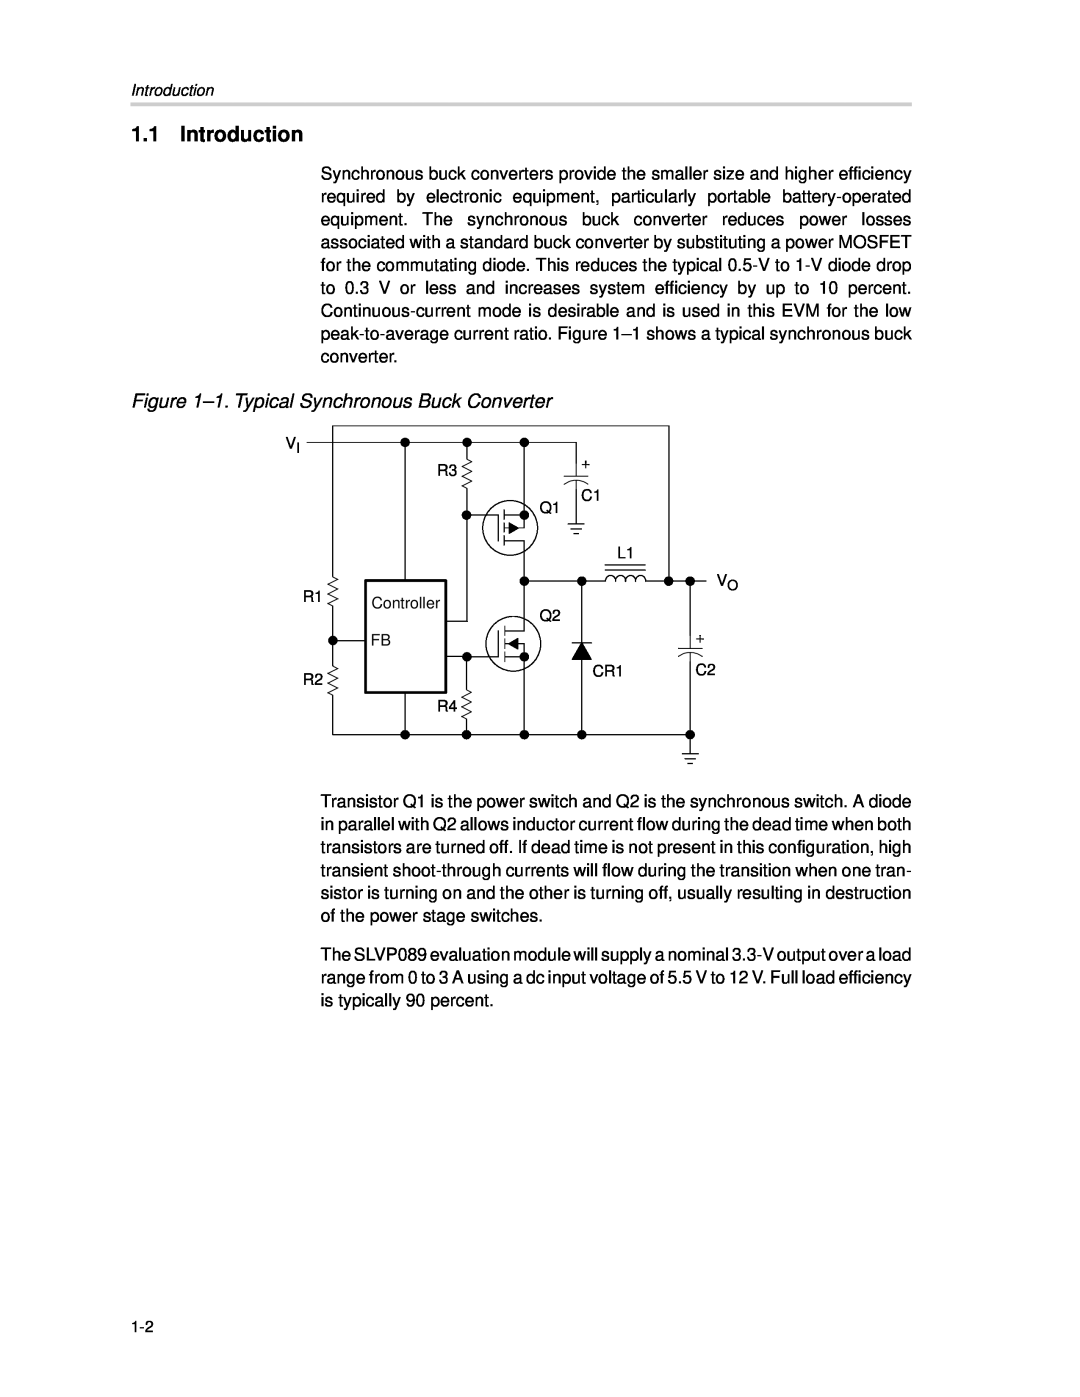 Texas Instruments SLVP089 manual Introduction, 1. Typical Synchronous Buck Converter 